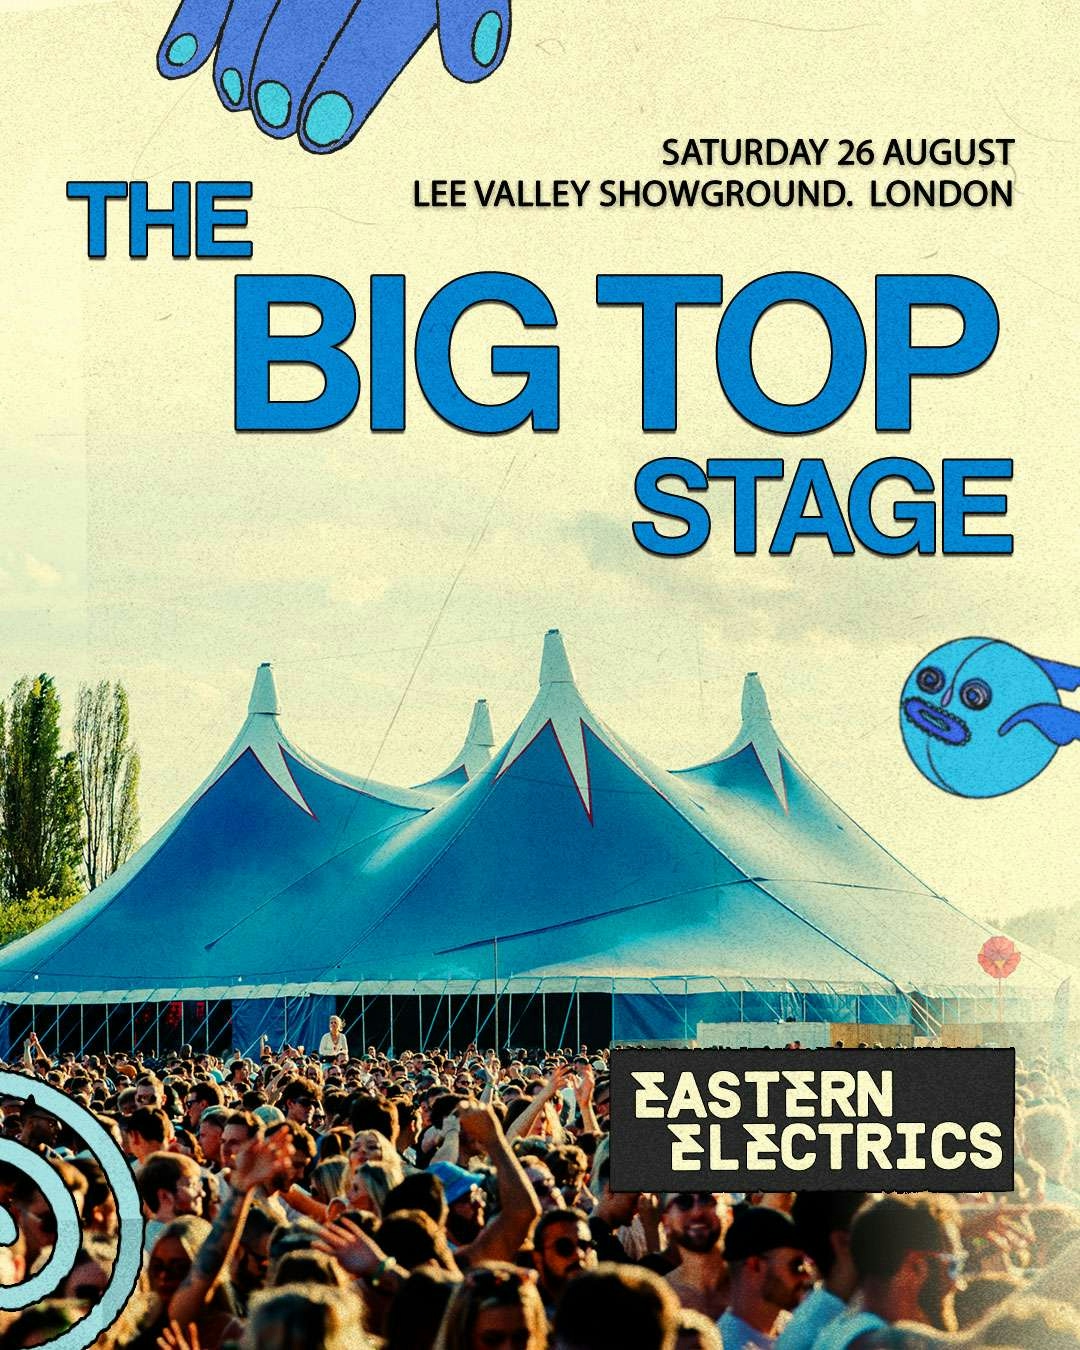 Get to know the Big Top stage